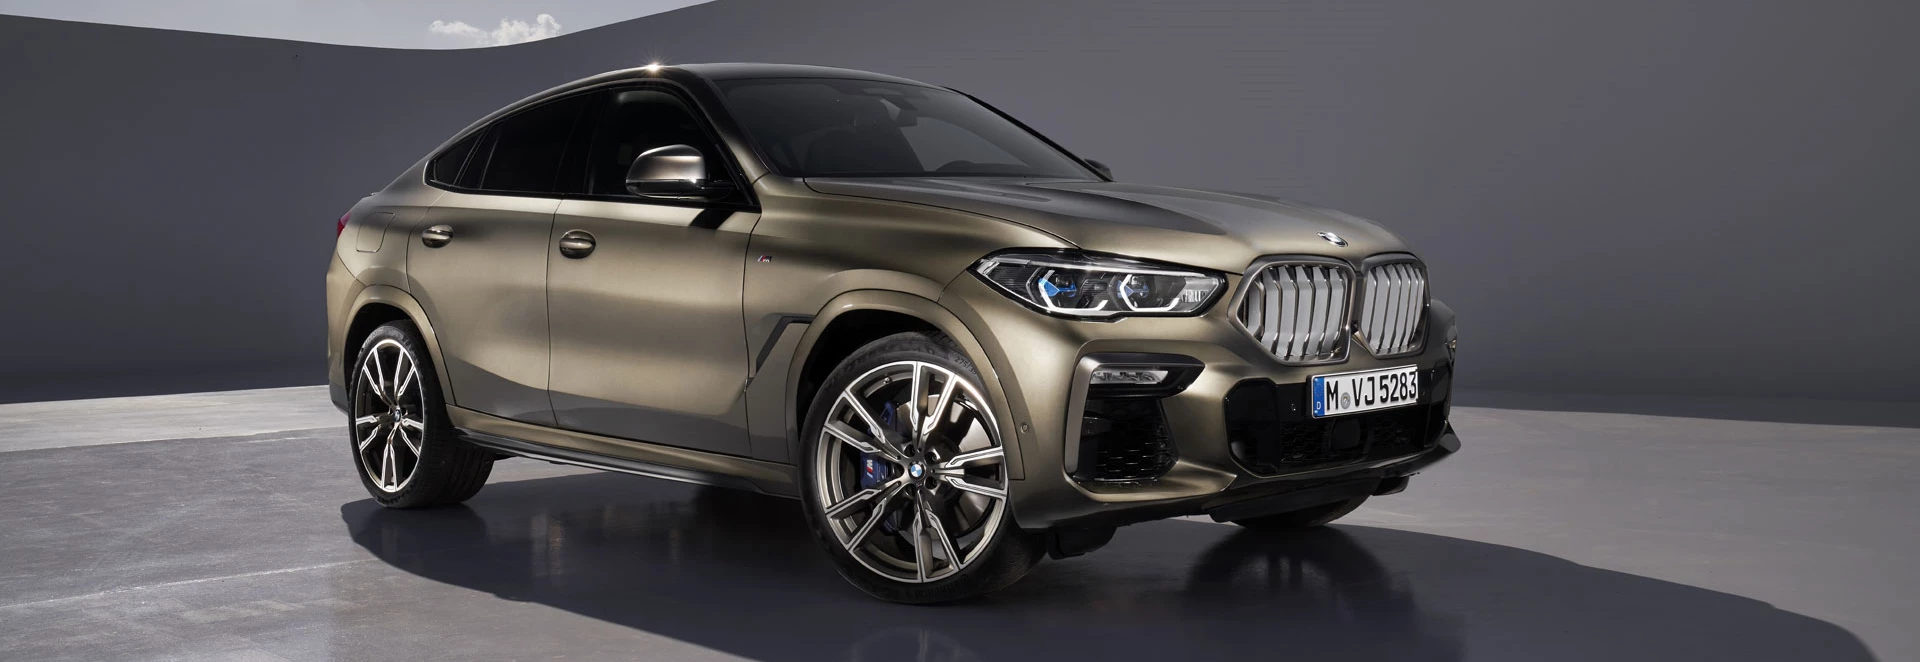 World Premier: This is the All-New BMW X6 